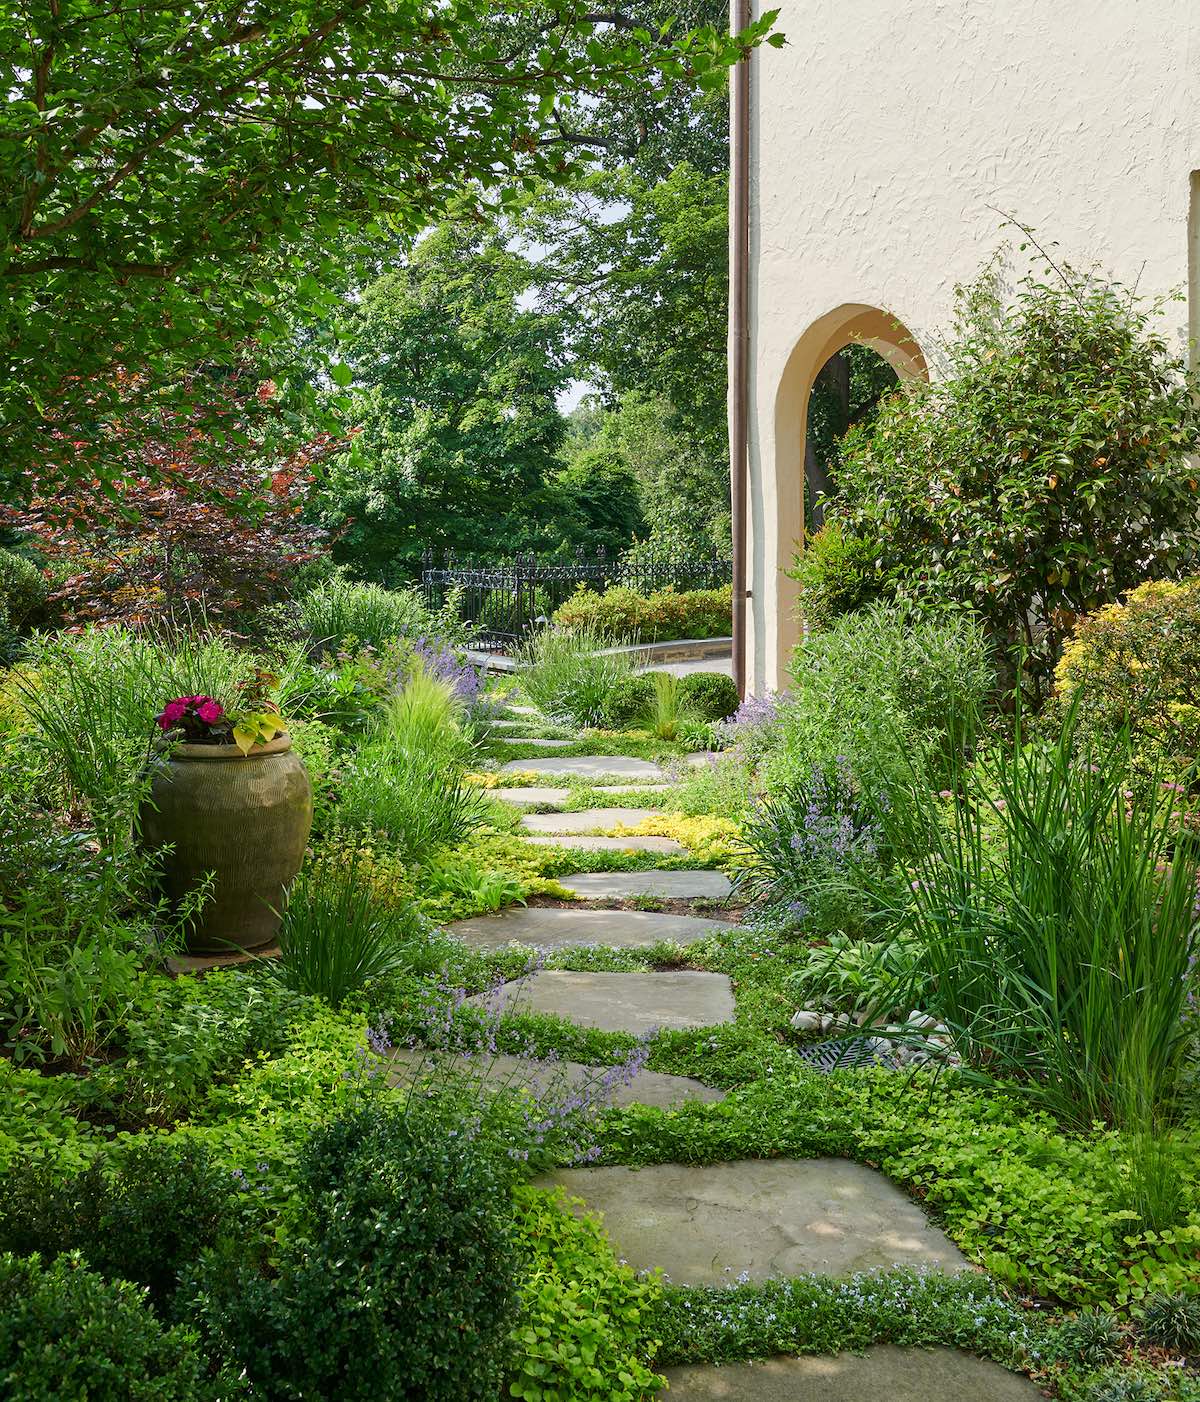 Charming stepping stone paths surrounded by lush plantings connect all areas in the landscape.